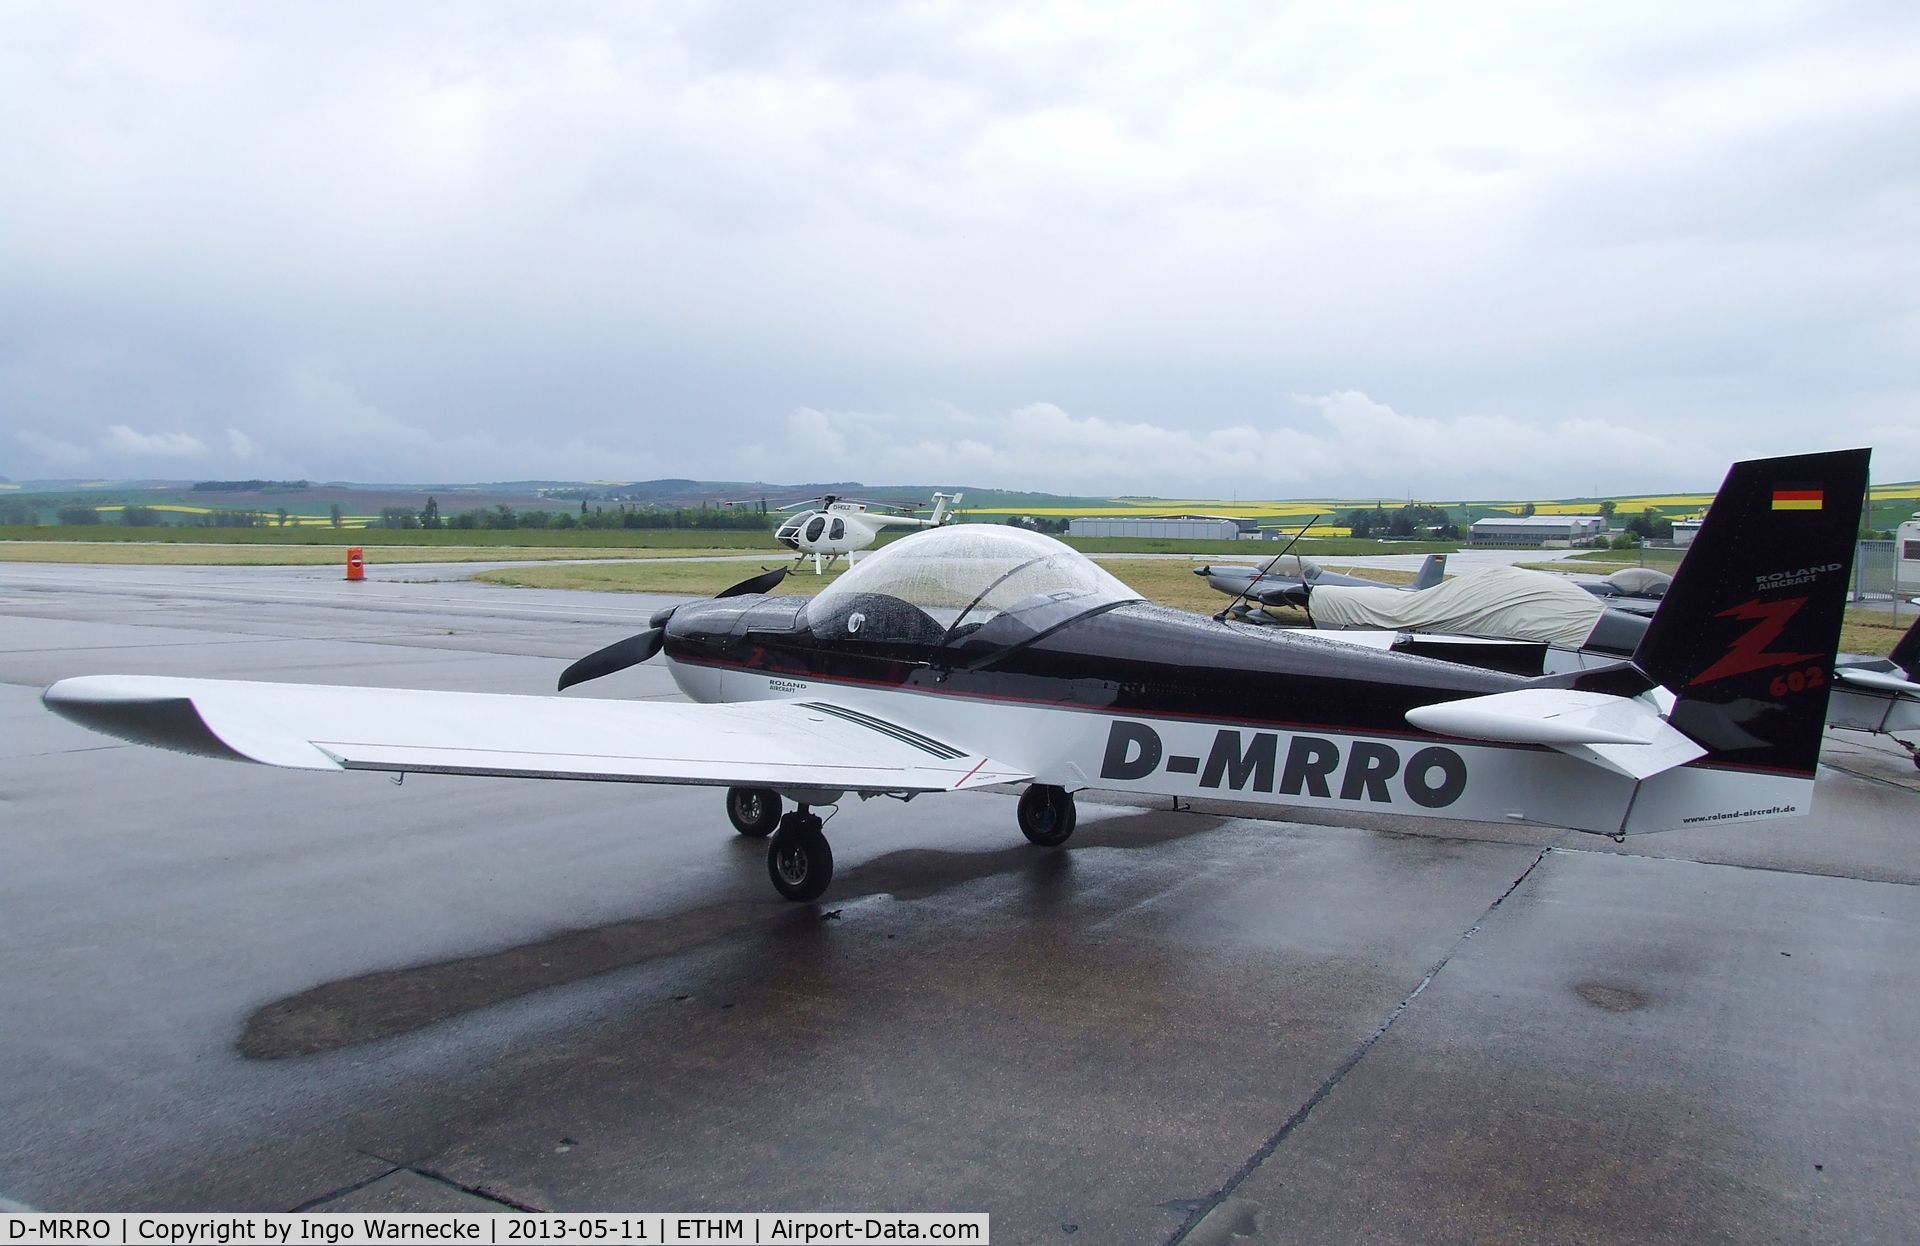 D-MRRO, Roland Z-602 Economy C/N Not found D-MRRO, Roland Aircraft Z 602 economy during an open day at former German Army Aviation base, now civilian Mendig airfield